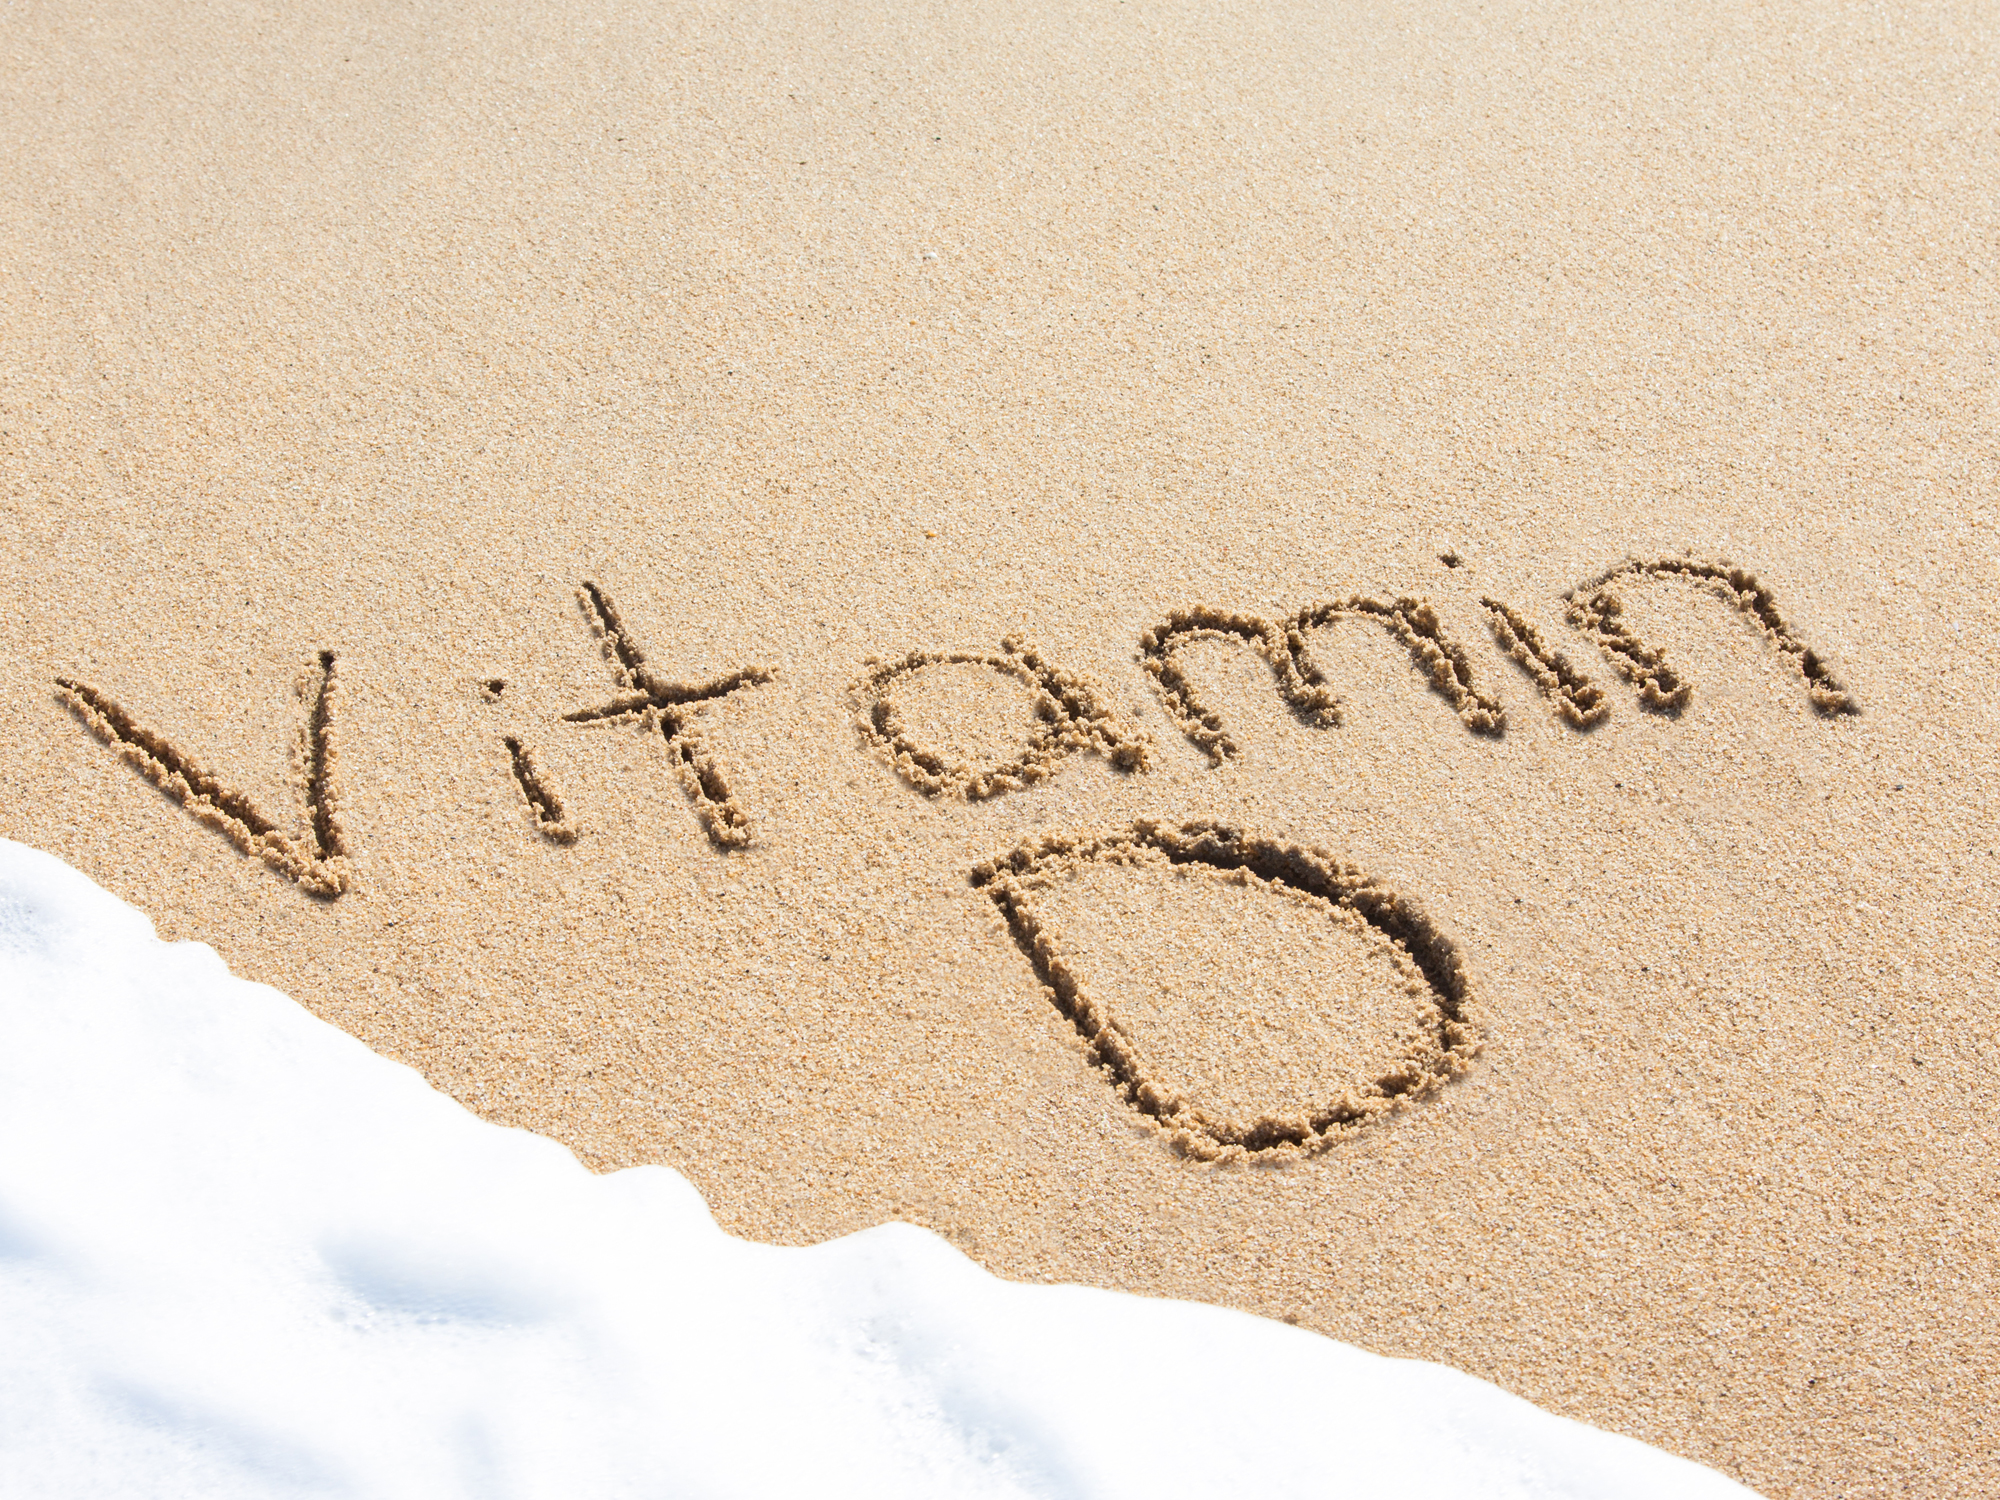 How much can vitamin D protect against breast cancer?